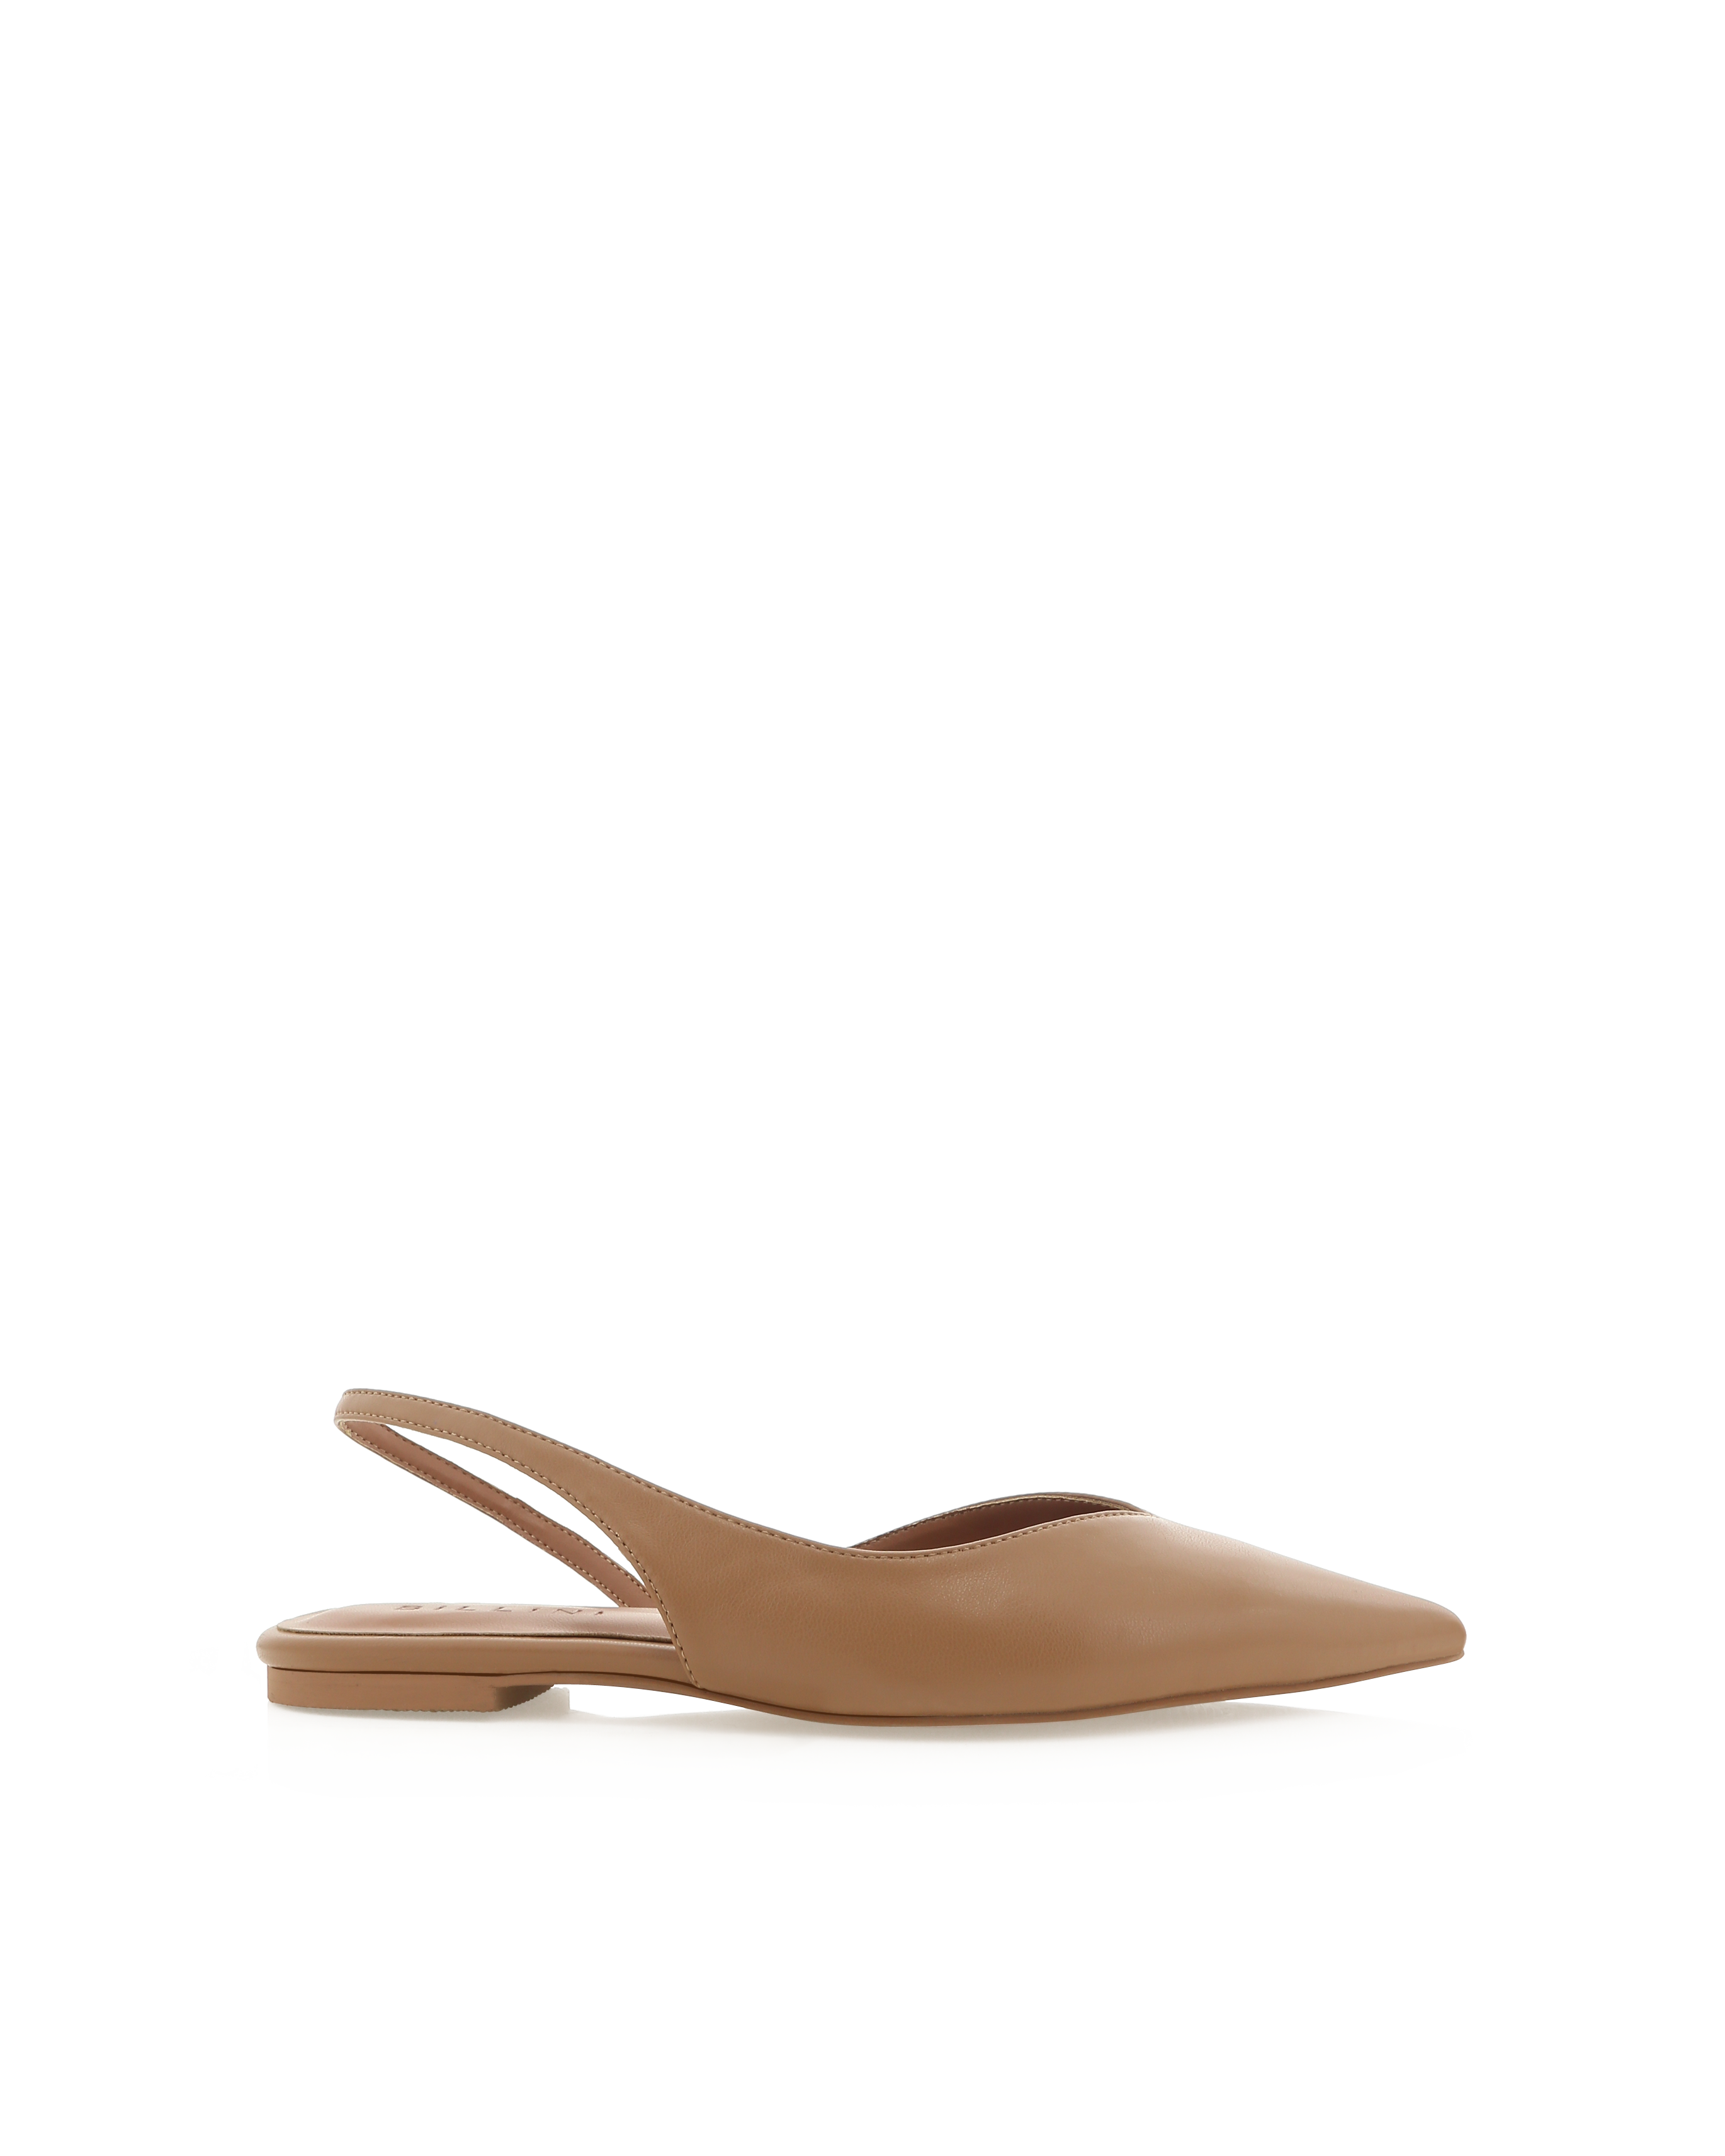 Hines Sandals - Toffee